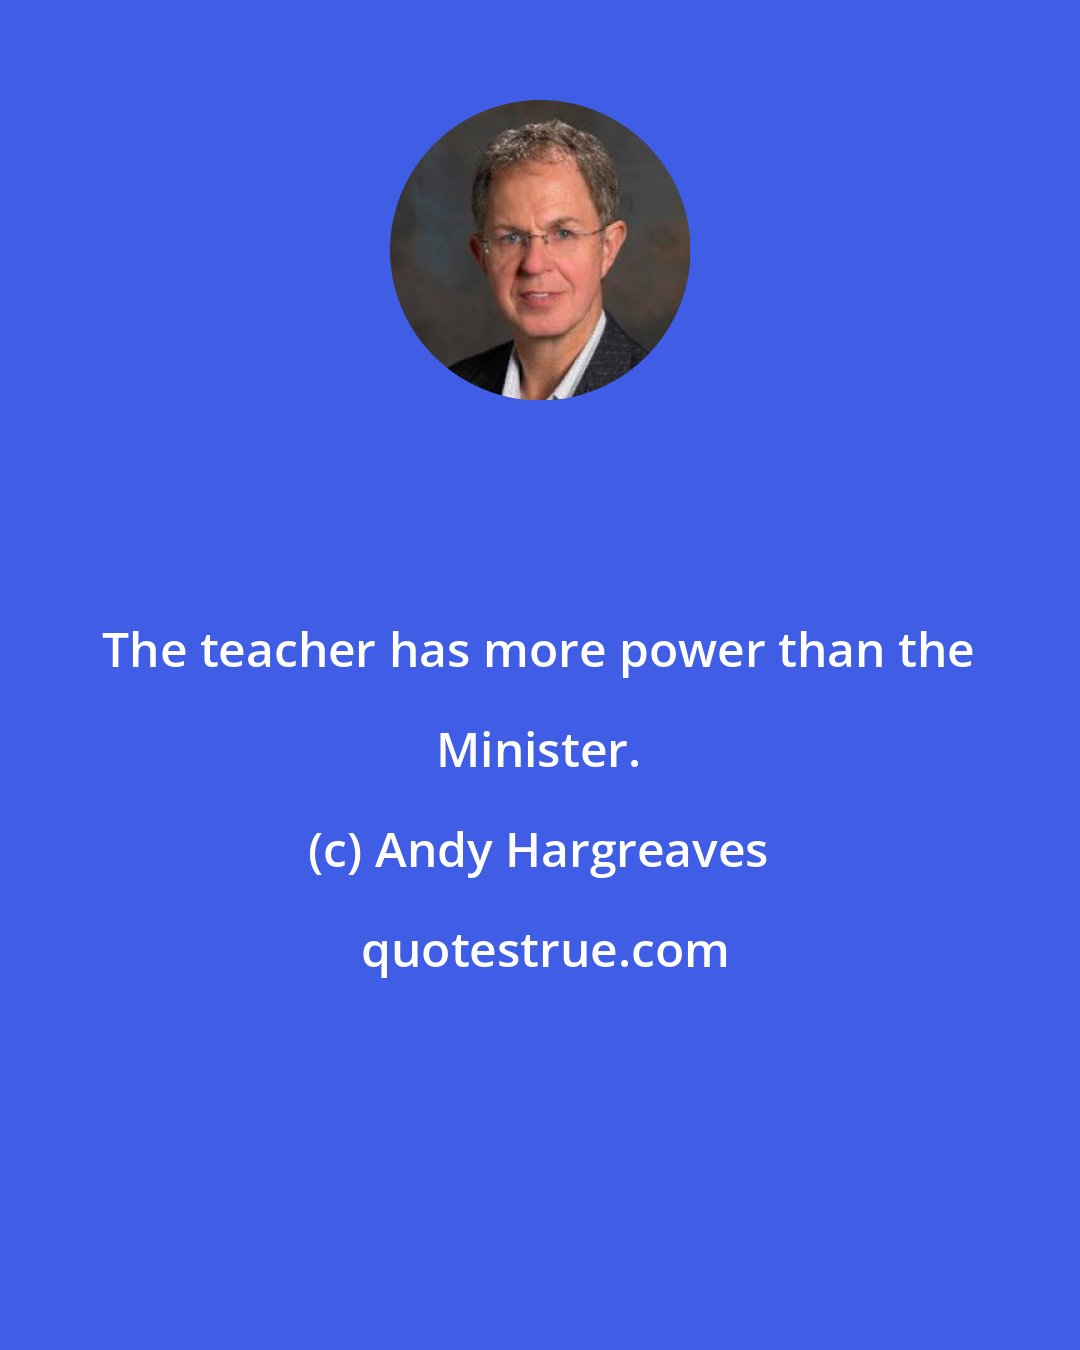 Andy Hargreaves: The teacher has more power than the Minister.